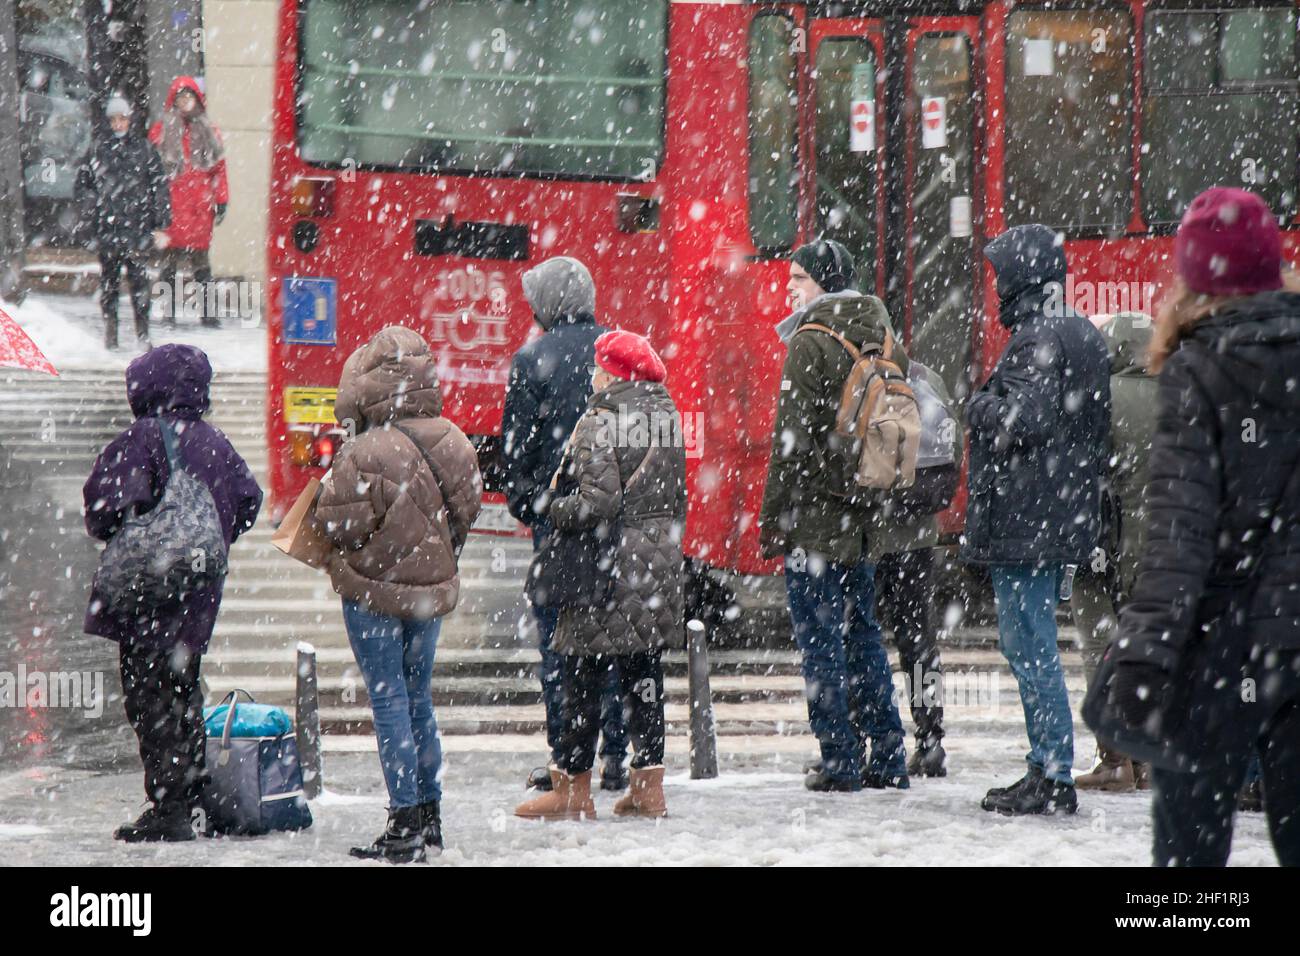 Belgrade, Serbia - January 11, 2022: People waiting at crossroad on a snowy city street during heavy snow fall Stock Photo